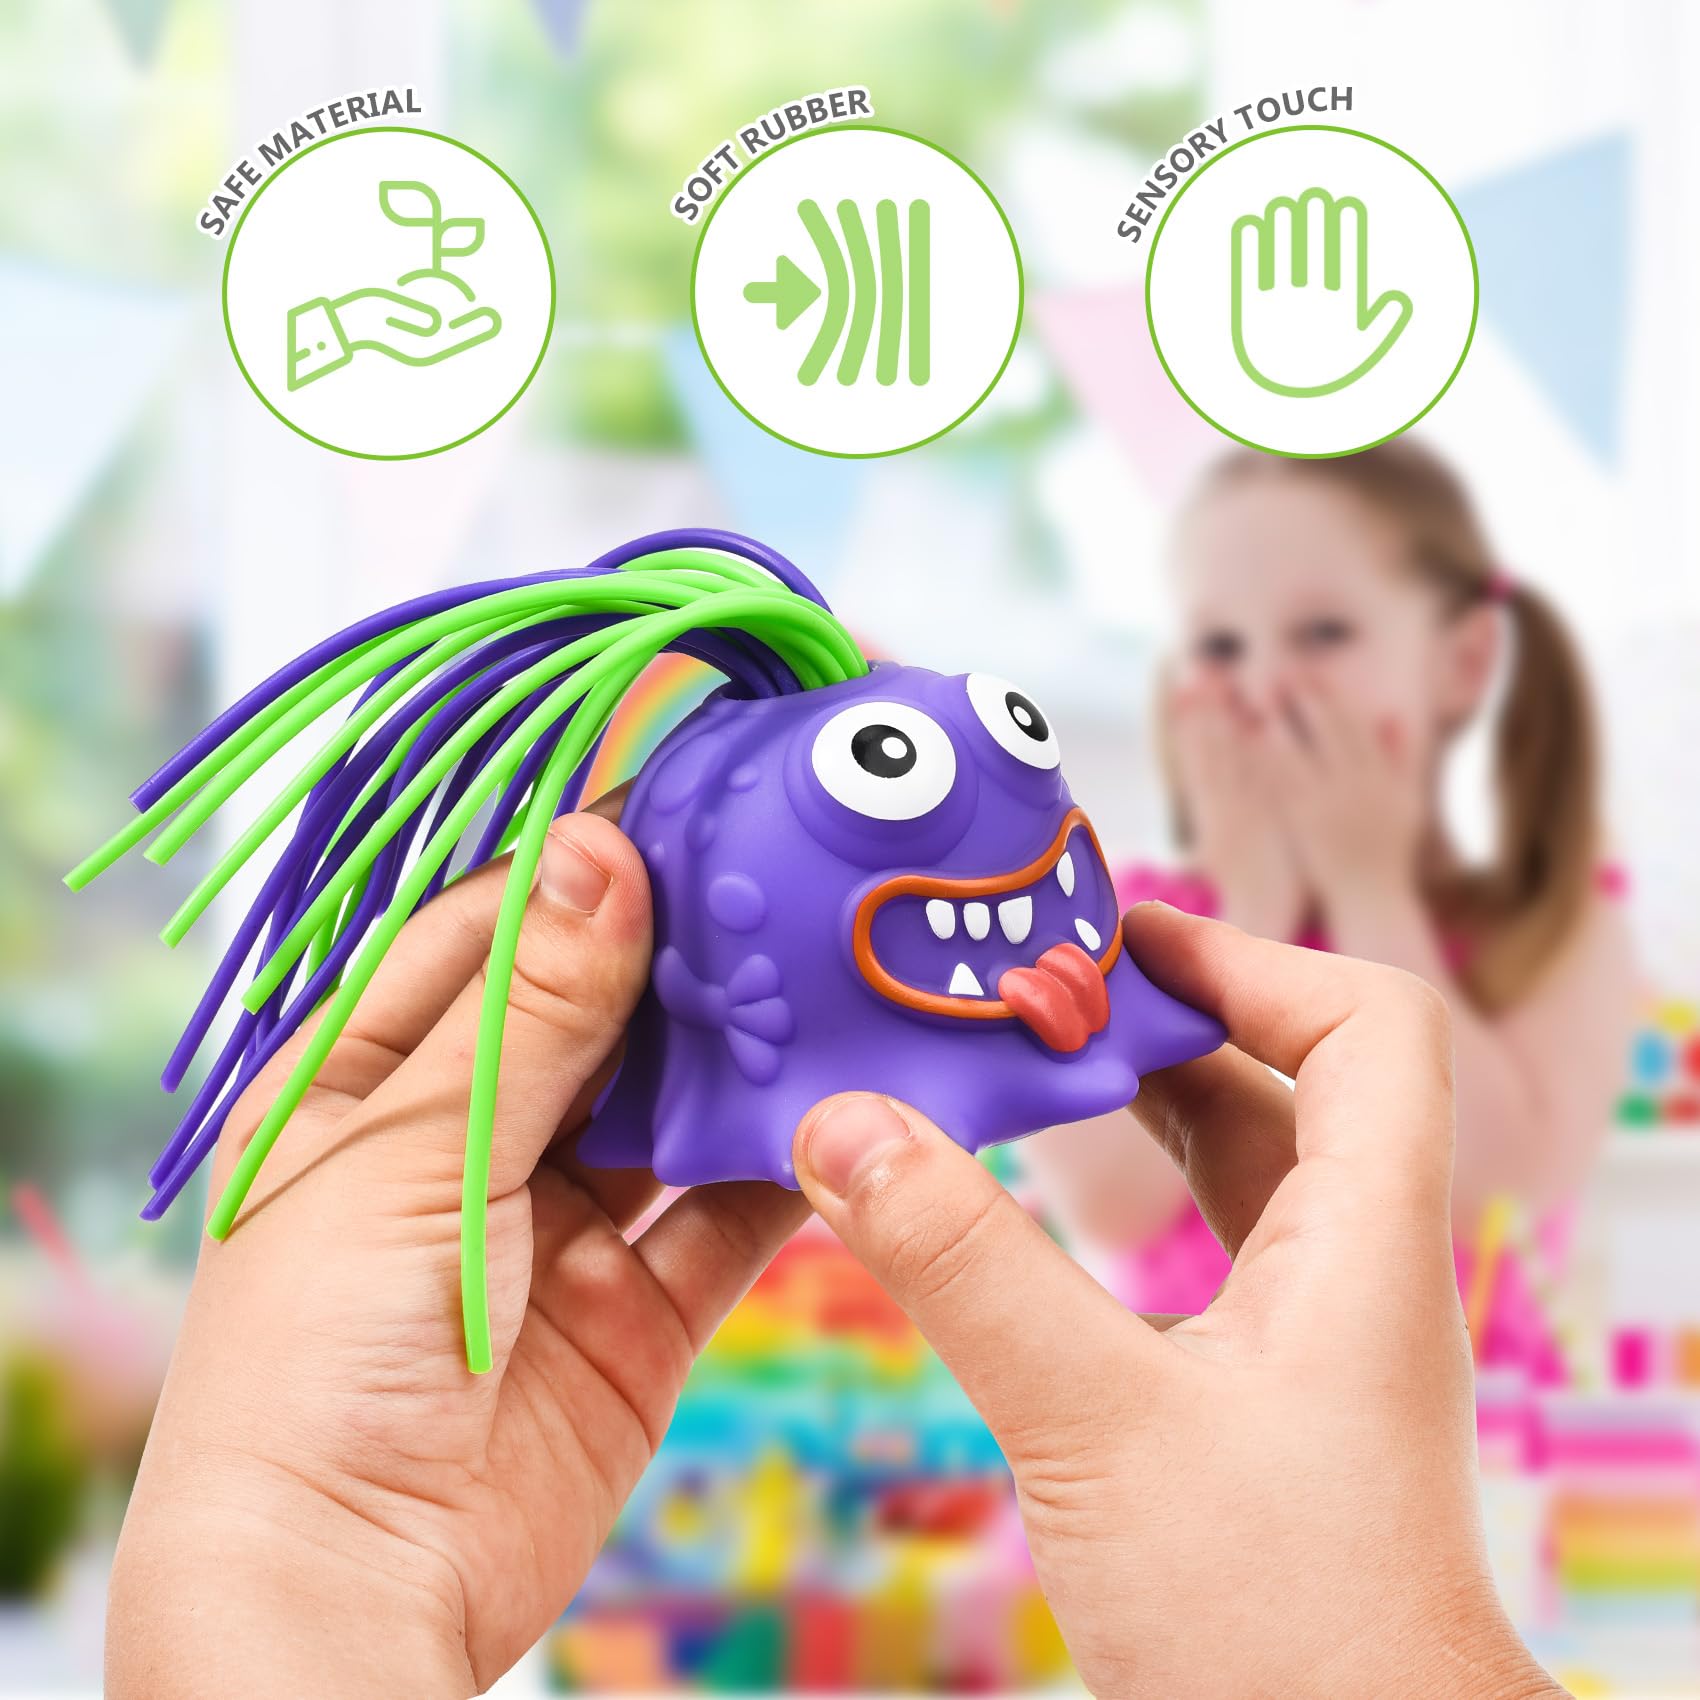 👹Halloween Screaming Monster Toys🔥Perfect Gift🔥